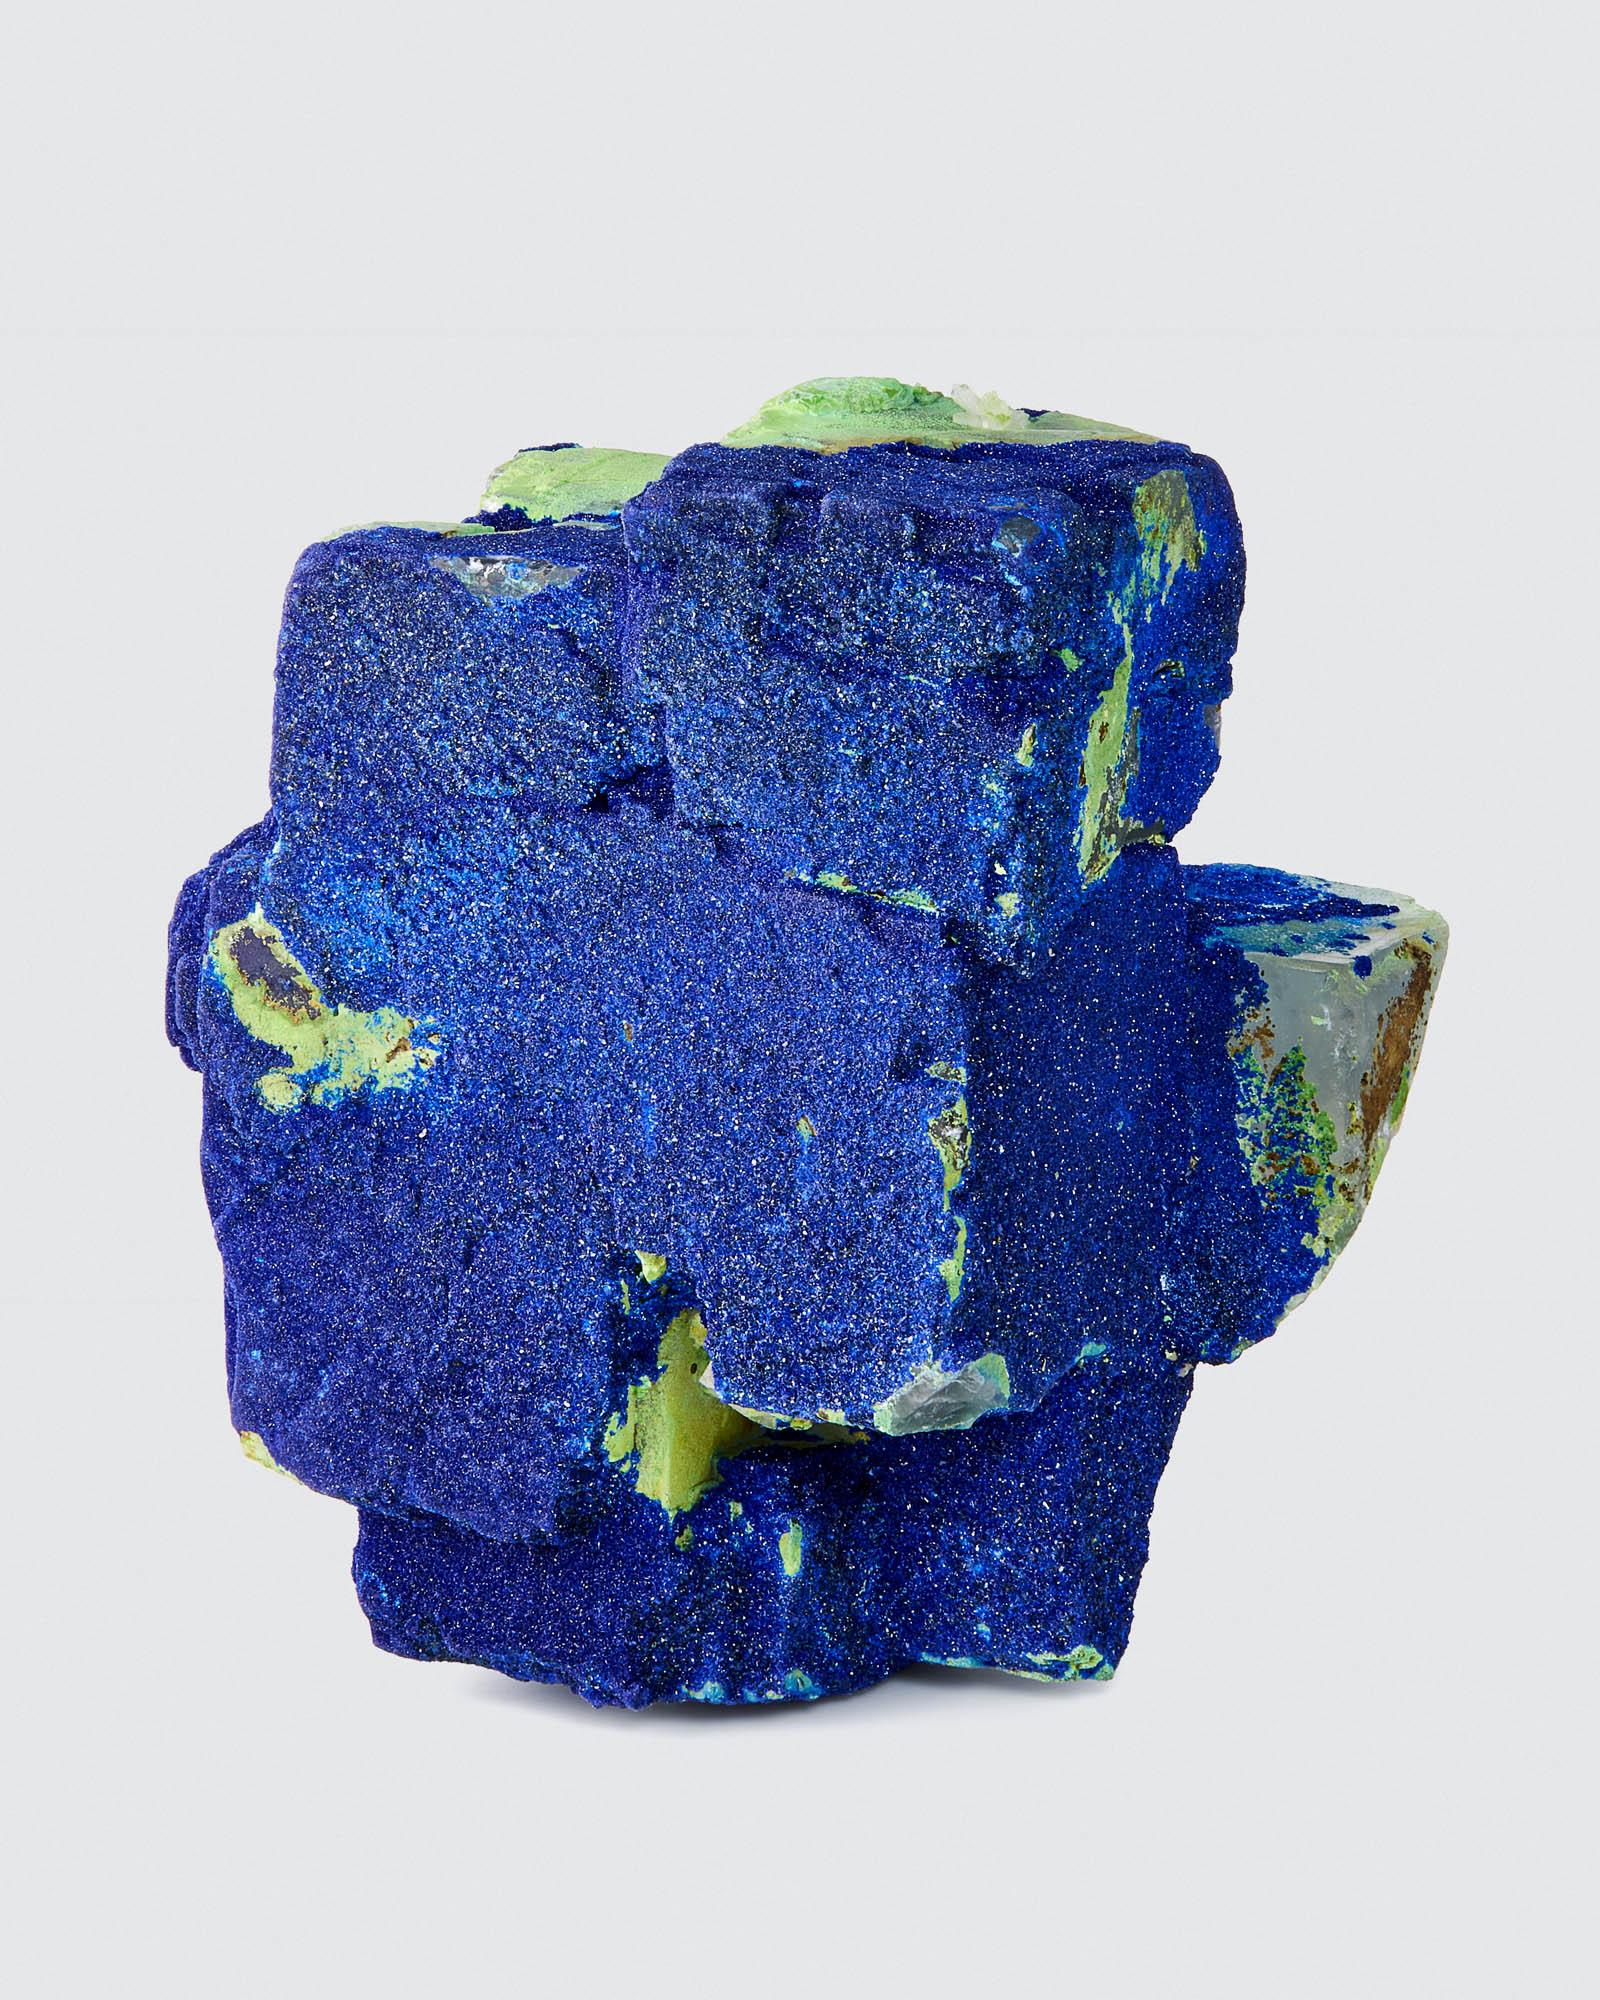 Azurite over Fluorite, Qinglong Mine, Qinglong Co., Qianxinan, Guizhou, China
10 cm tall x 9 cm wide
Here before us is an example of the seemingly endless variety of minerals from China. This azurite over fluorite from China represents a very rare